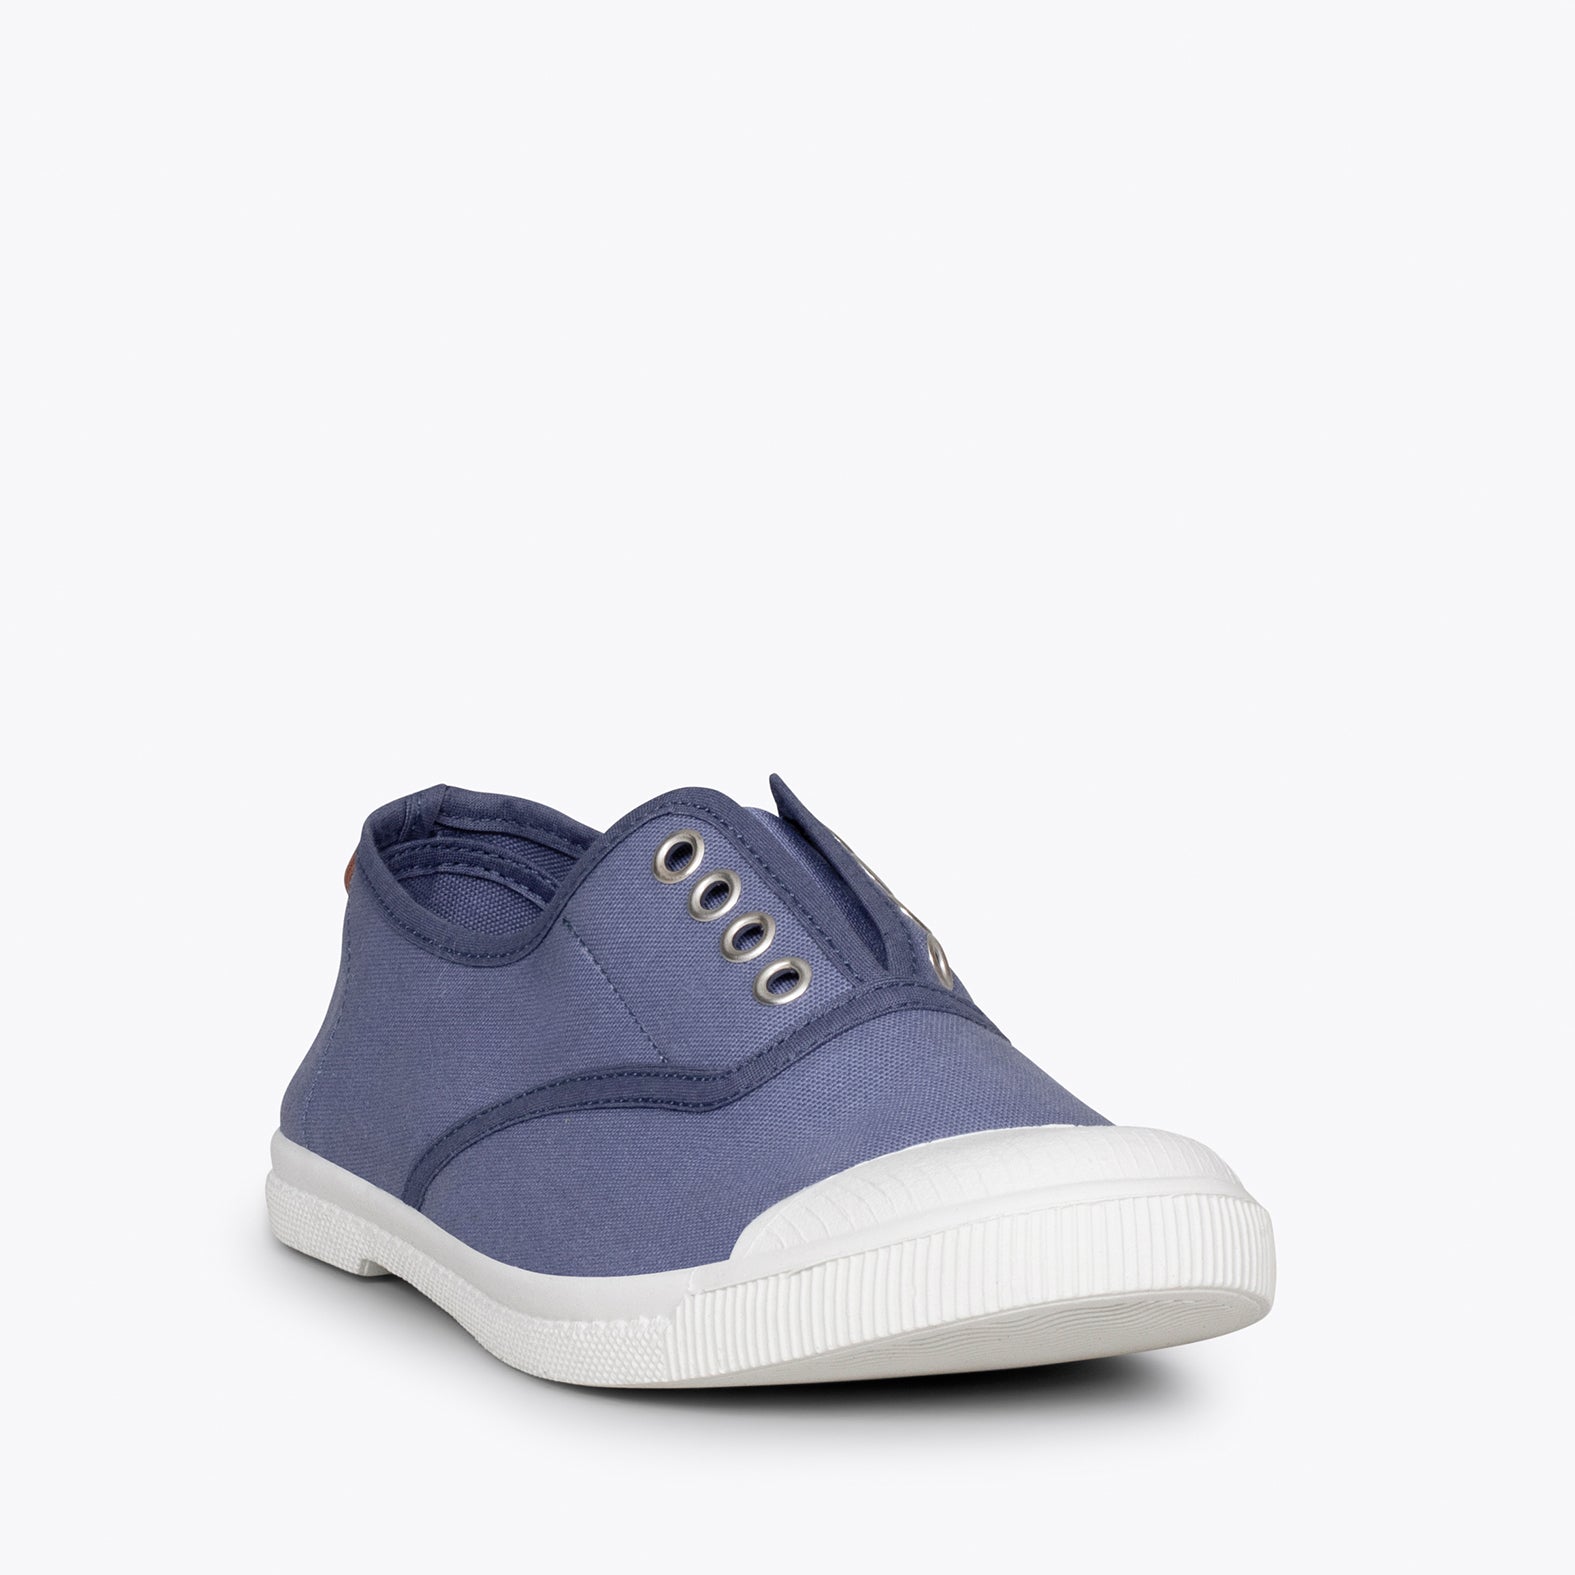 WAY – JEANS sneakers with elastic